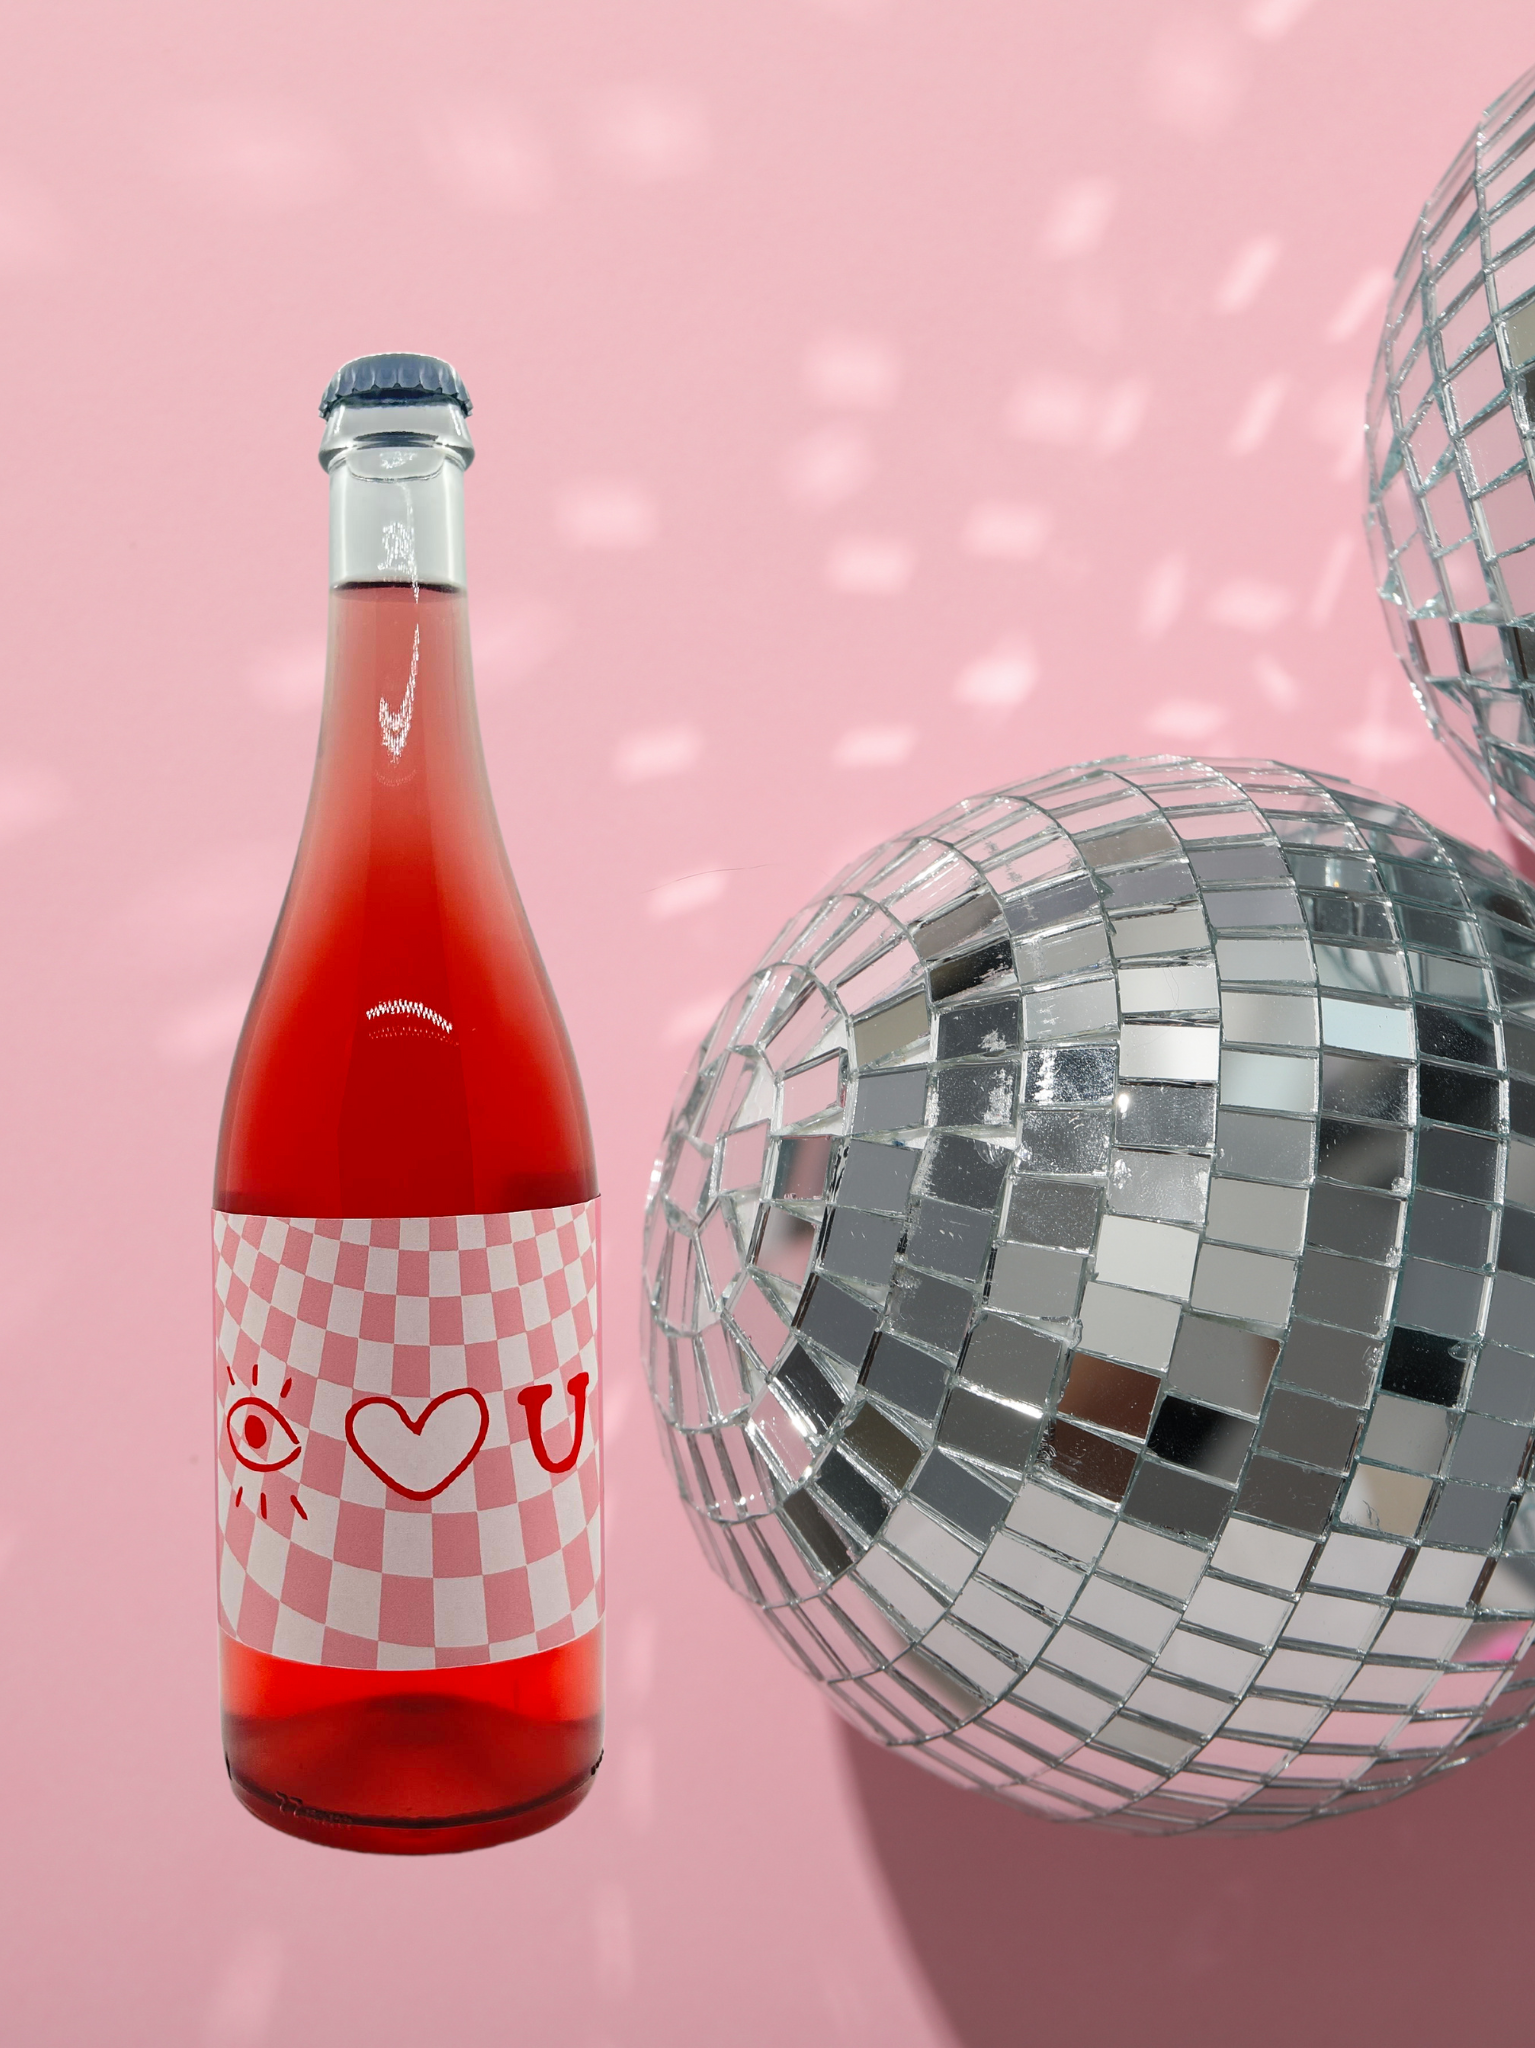 Cupid's Got Nothing on Our Valentine's Wine Bundle!